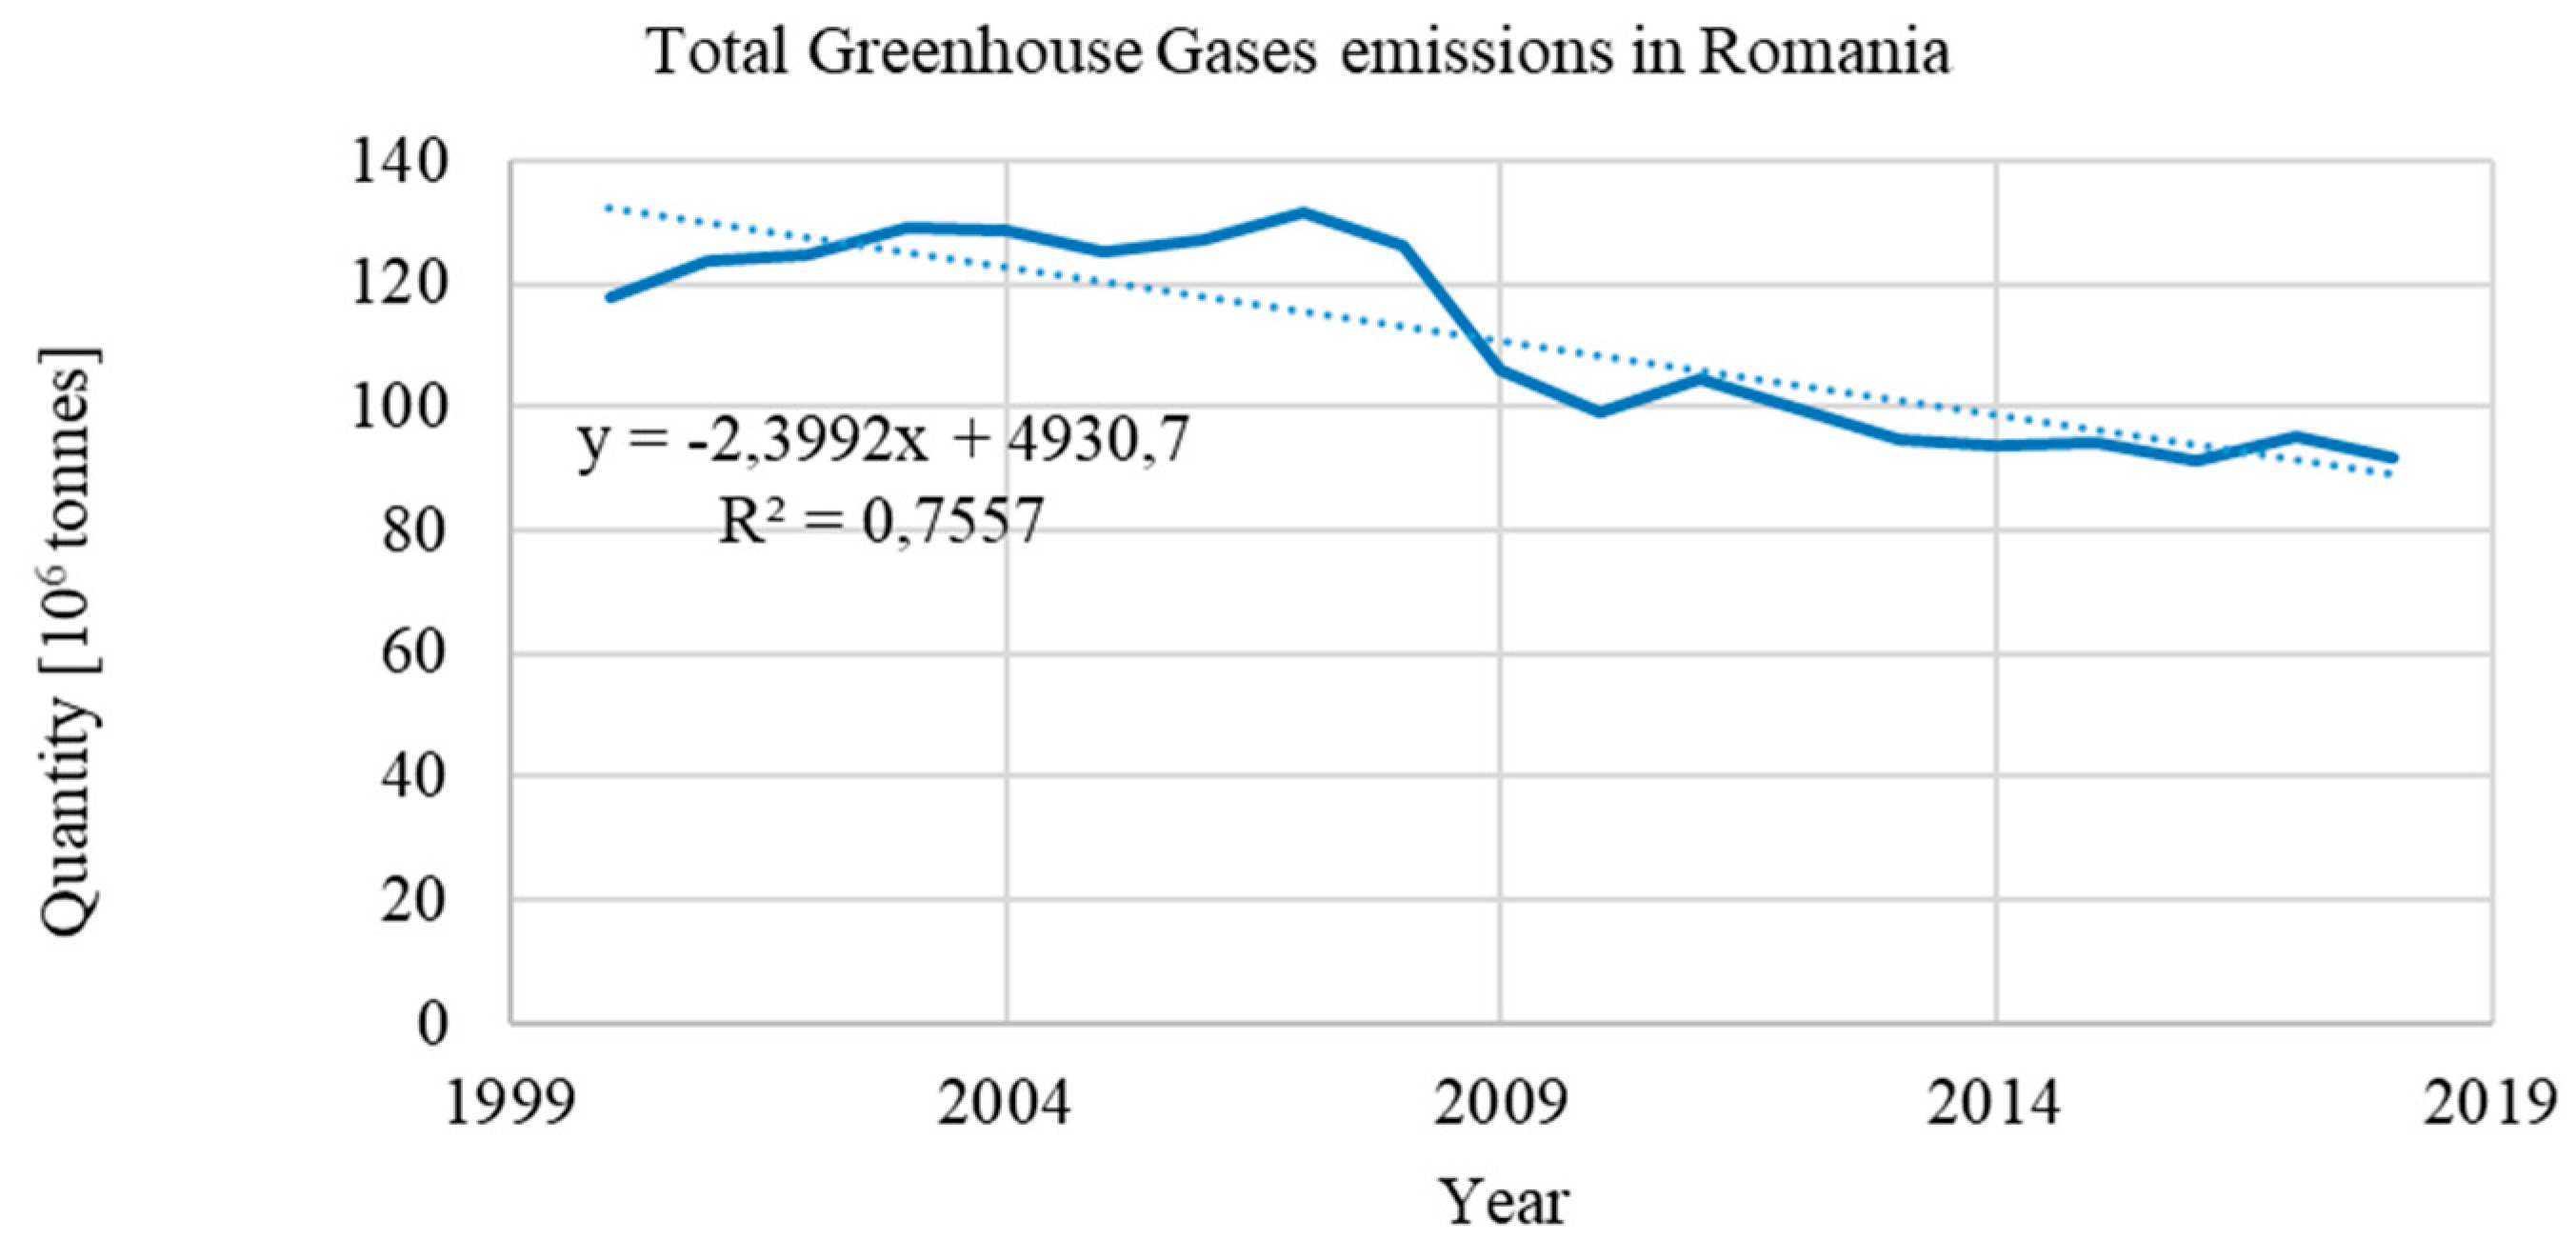 Romania limits its GHG emissions in the absence of large industrial  platforms